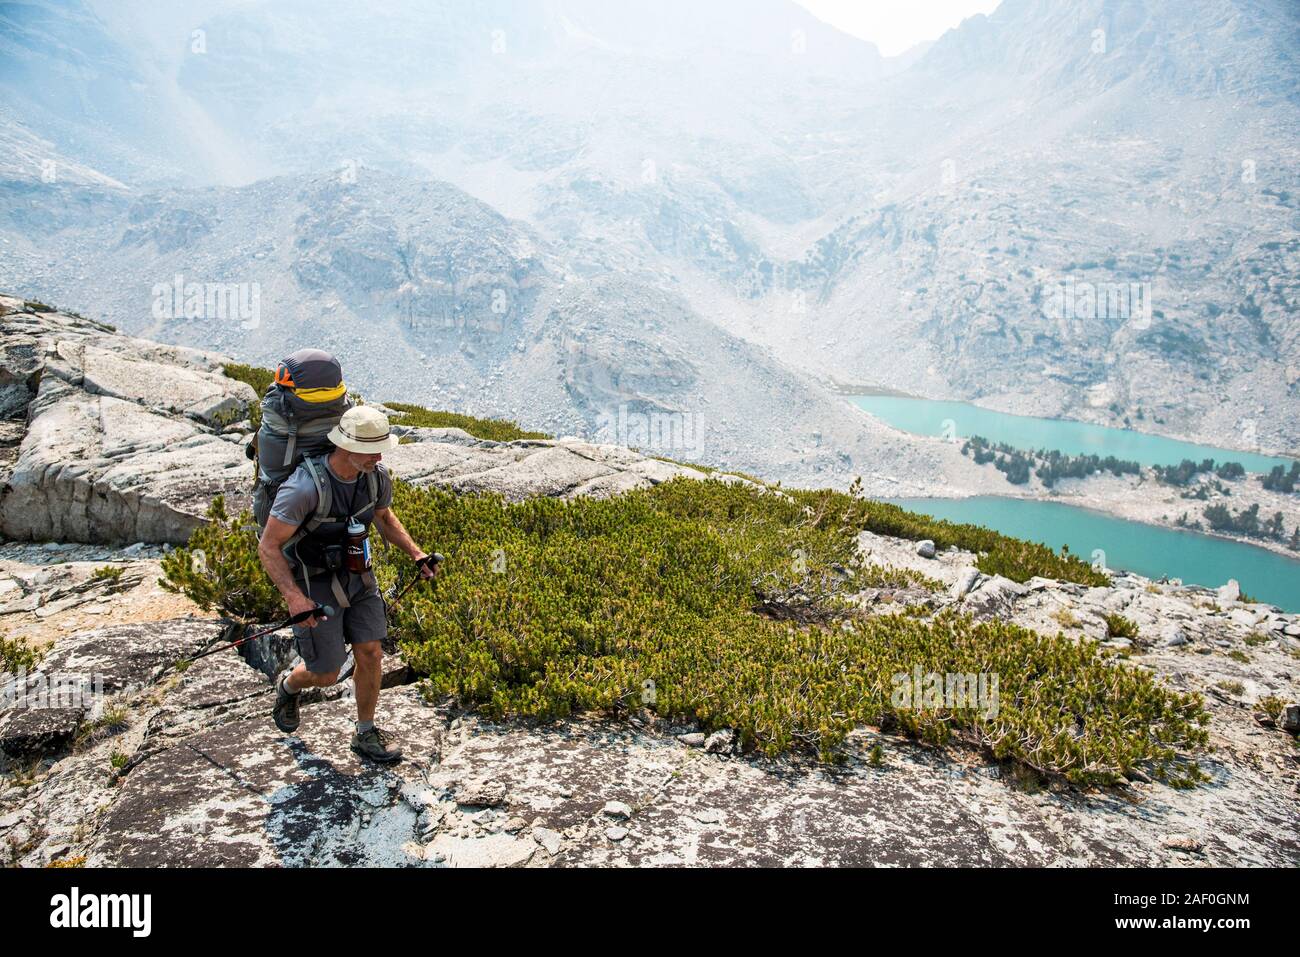 Man hiking through mountains with lakes in the distance Stock Photo